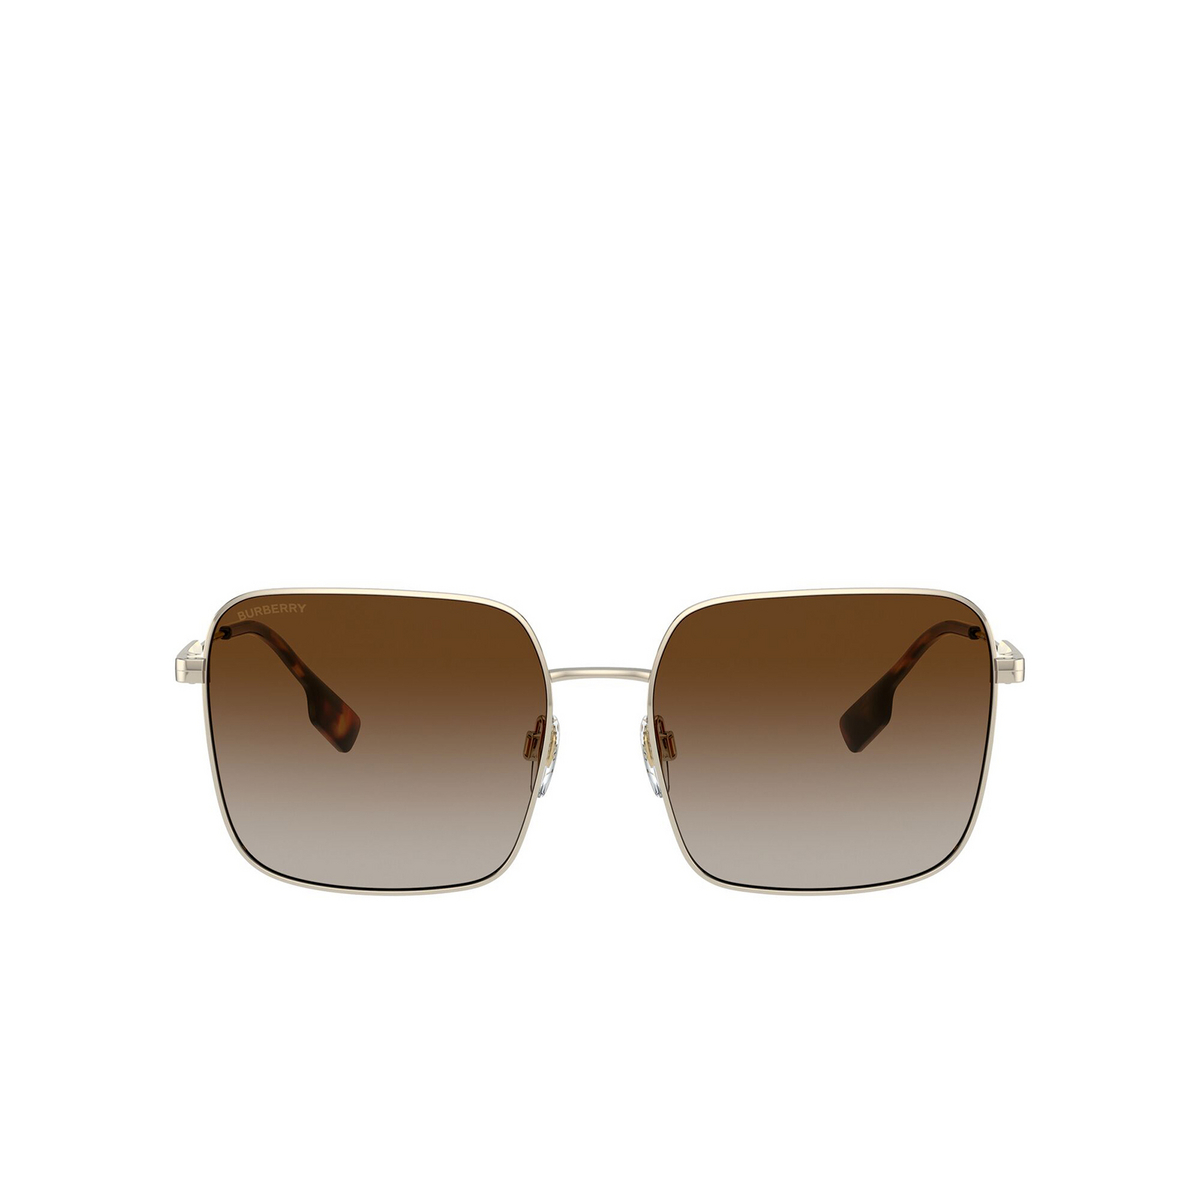 Burberry® Square Sunglasses: Jude BE3119 color Light Gold 110913 - front view.